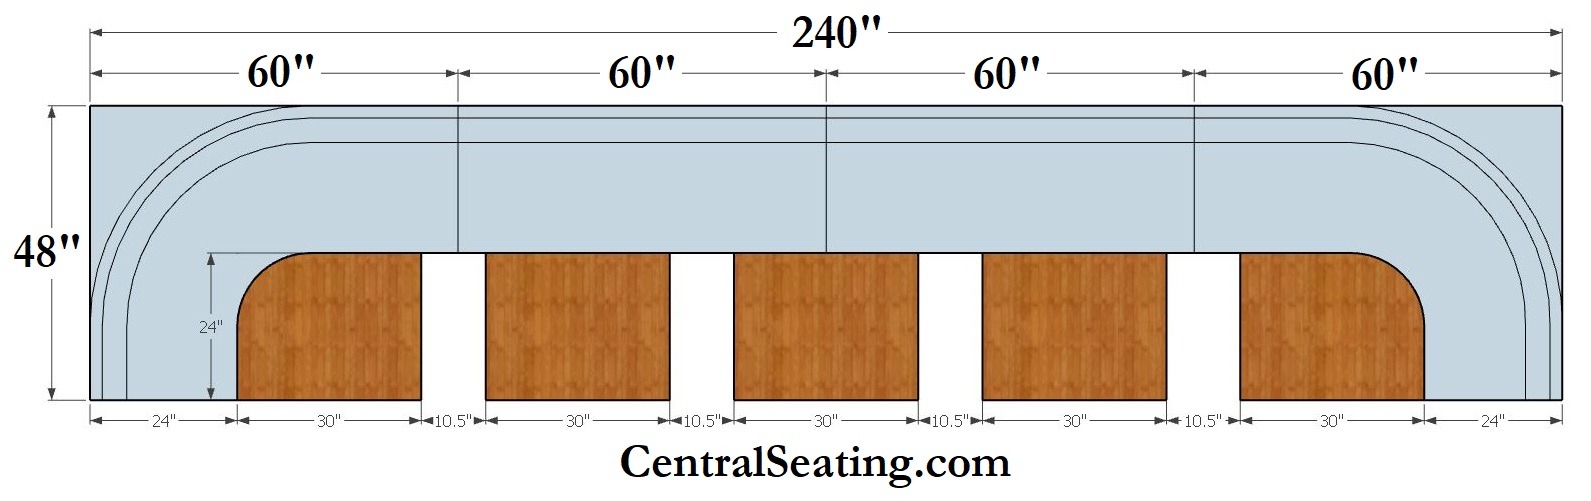 Table Size for 240